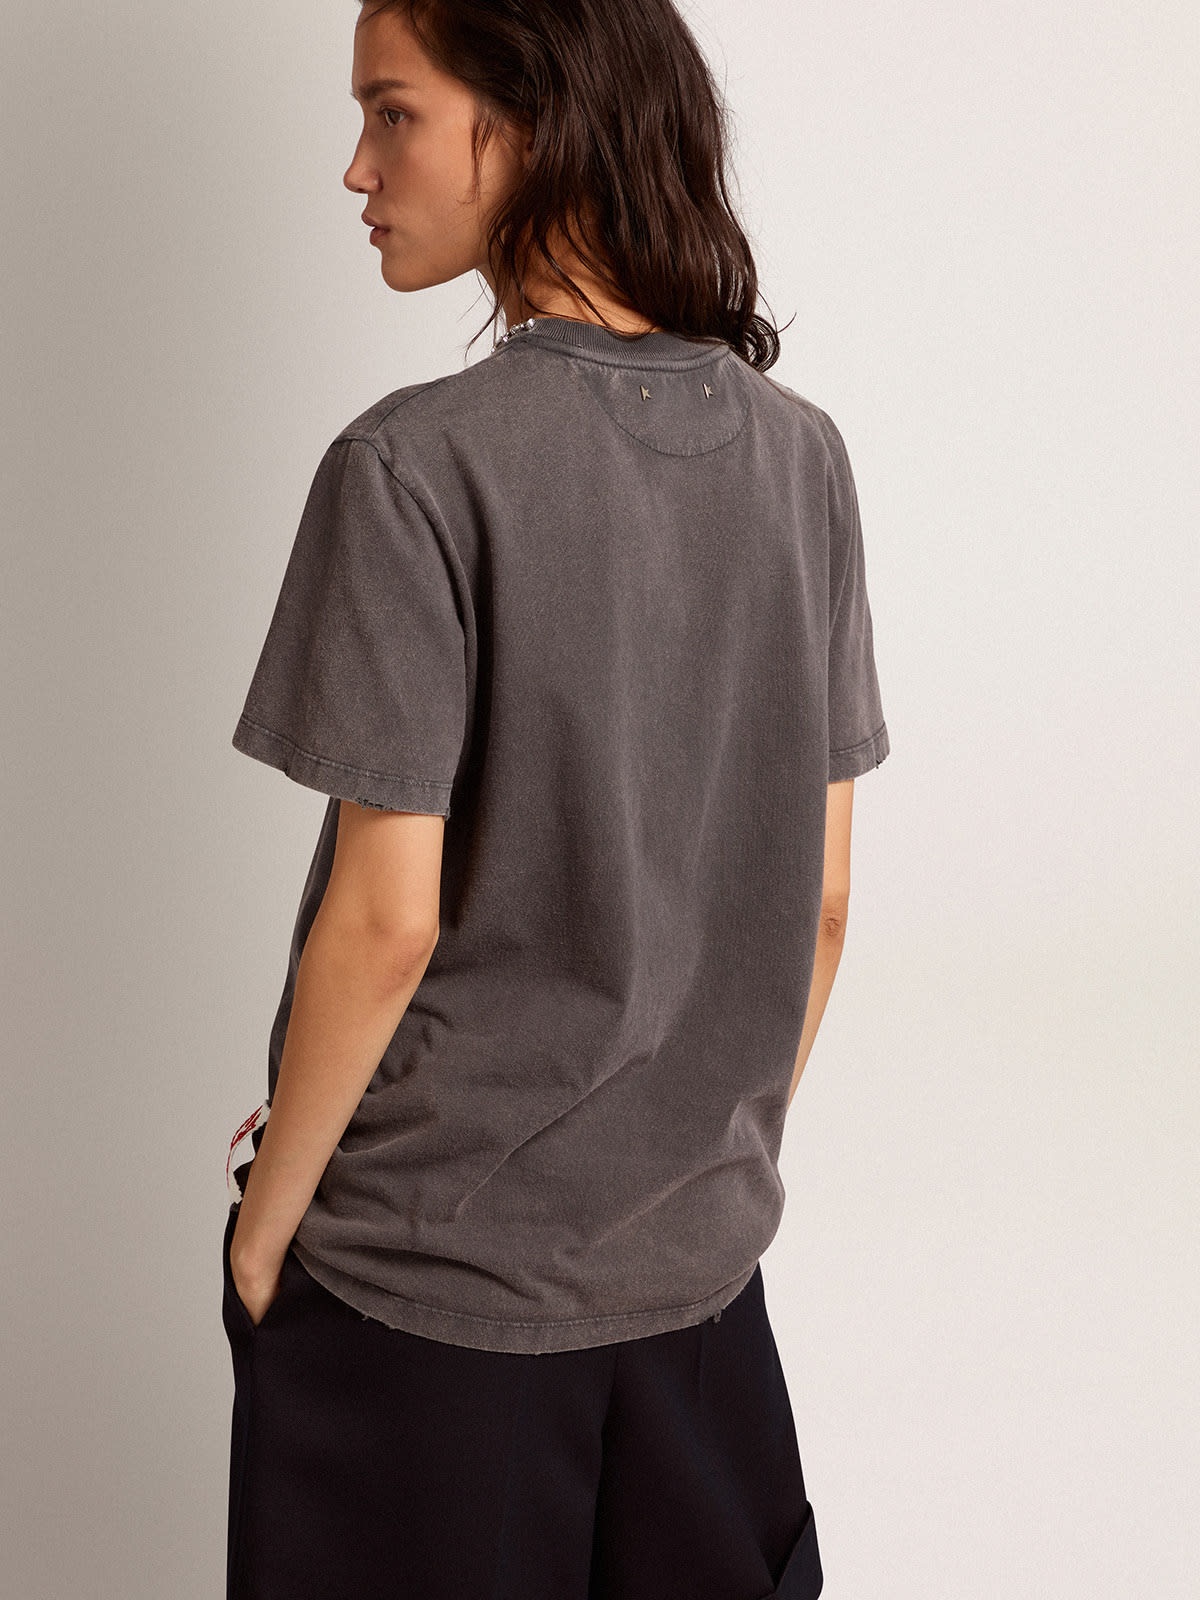 Women's anthracite gray T-shirt with crystals - 4